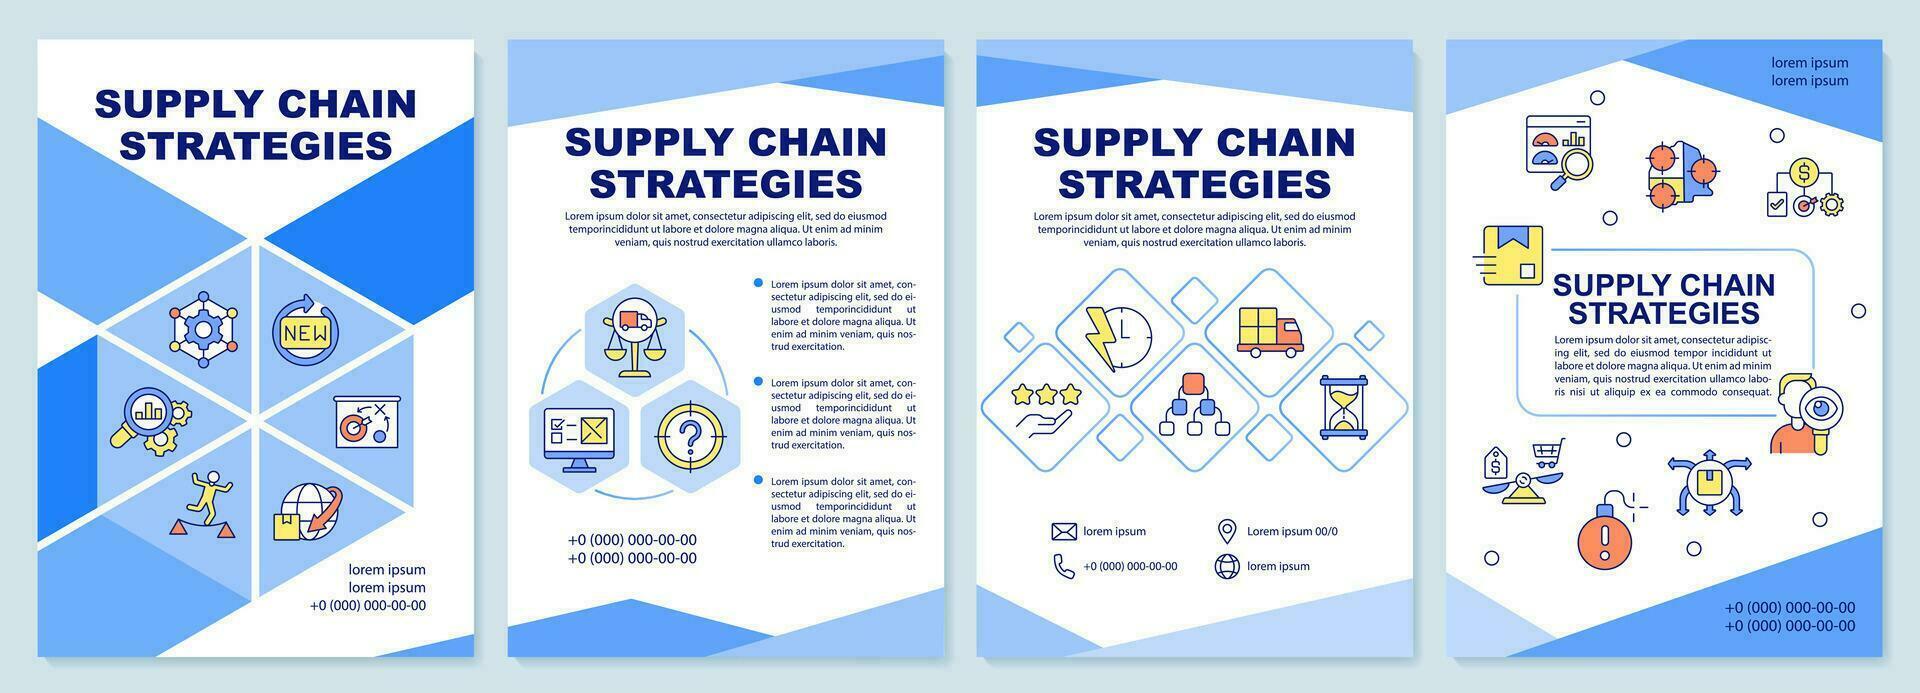 Supply chain strategies blue brochure template. Management. Leaflet design with linear icons. Editable 4 vector layouts for presentation, annual reports